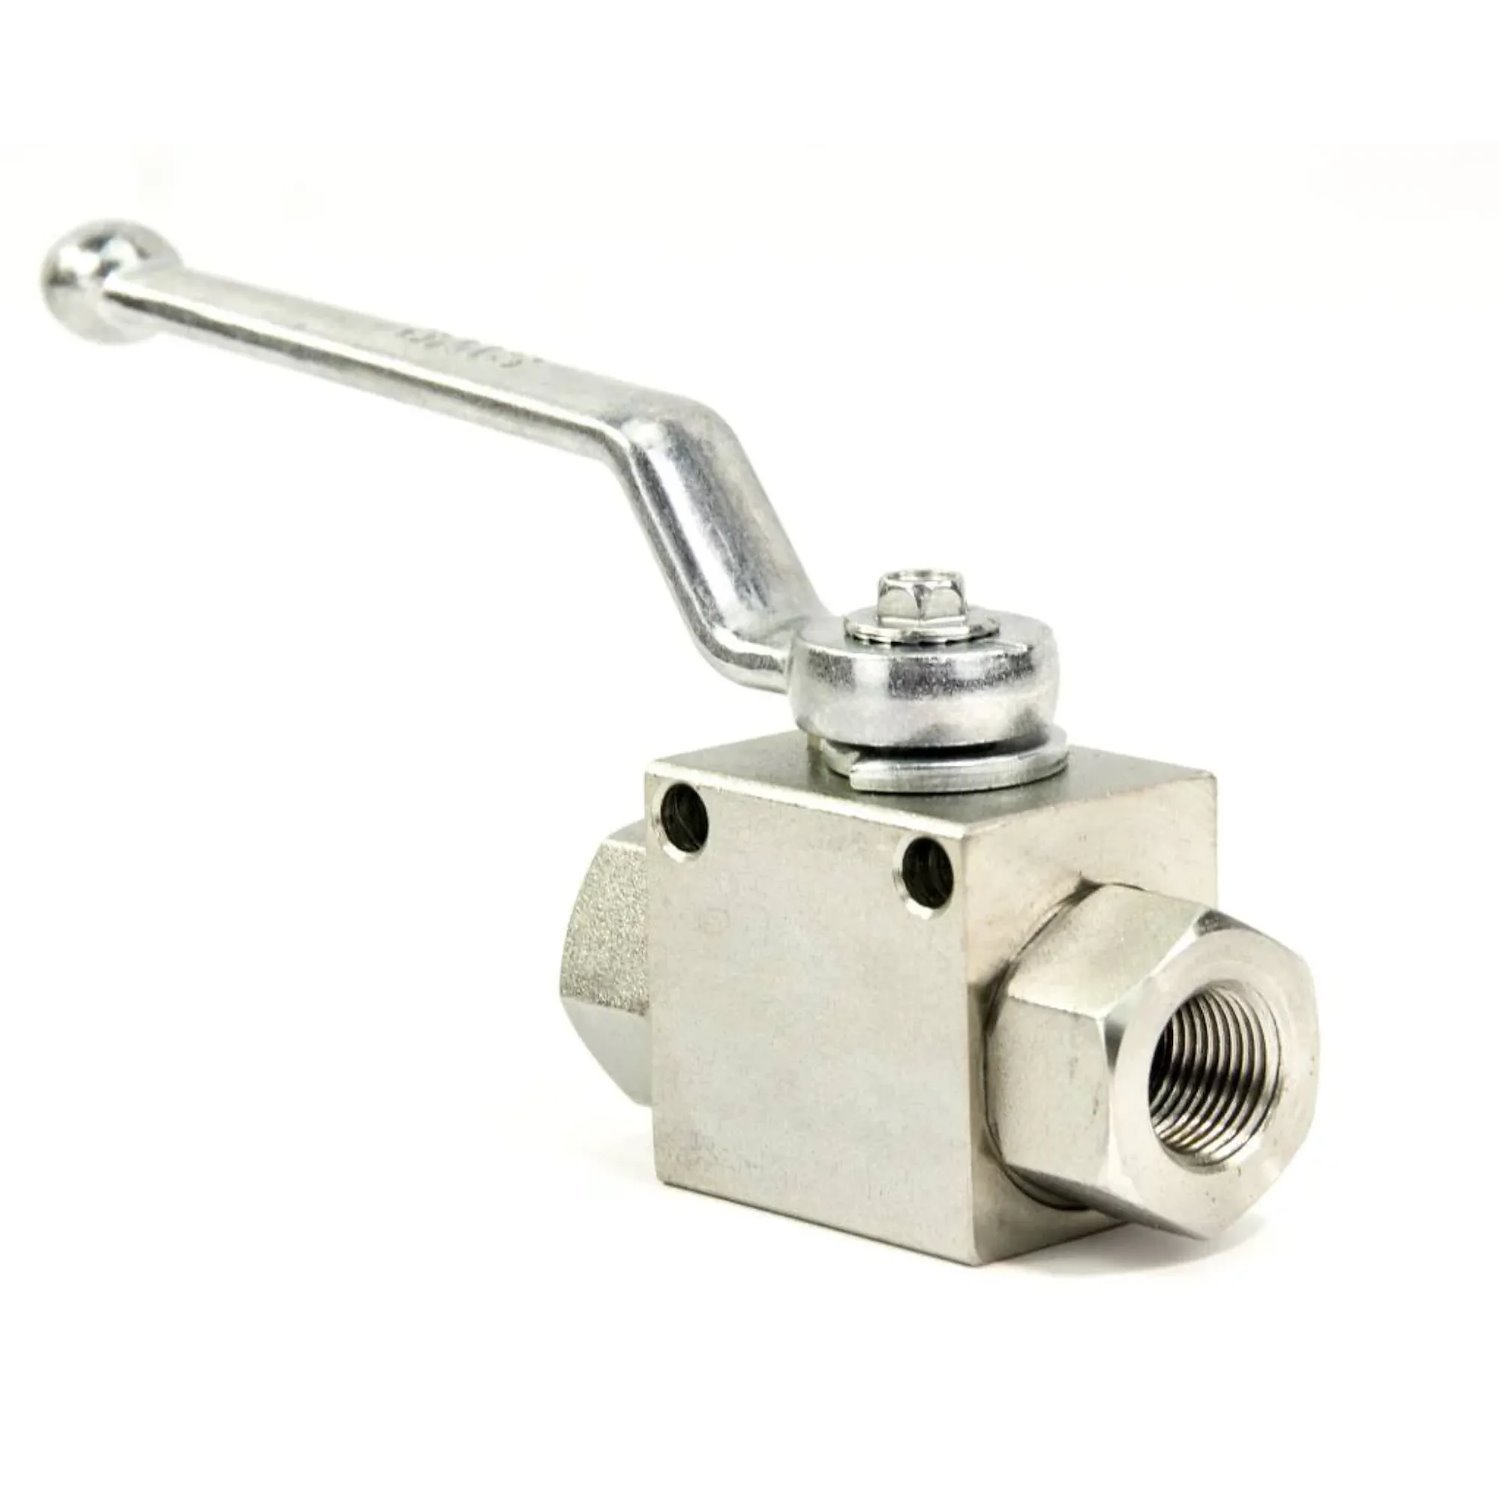 00-31021-V Carbon Steel Safety Shut Off Valve, Rated to 7250 psi/3/8 in. NPT Inlet and Outlet